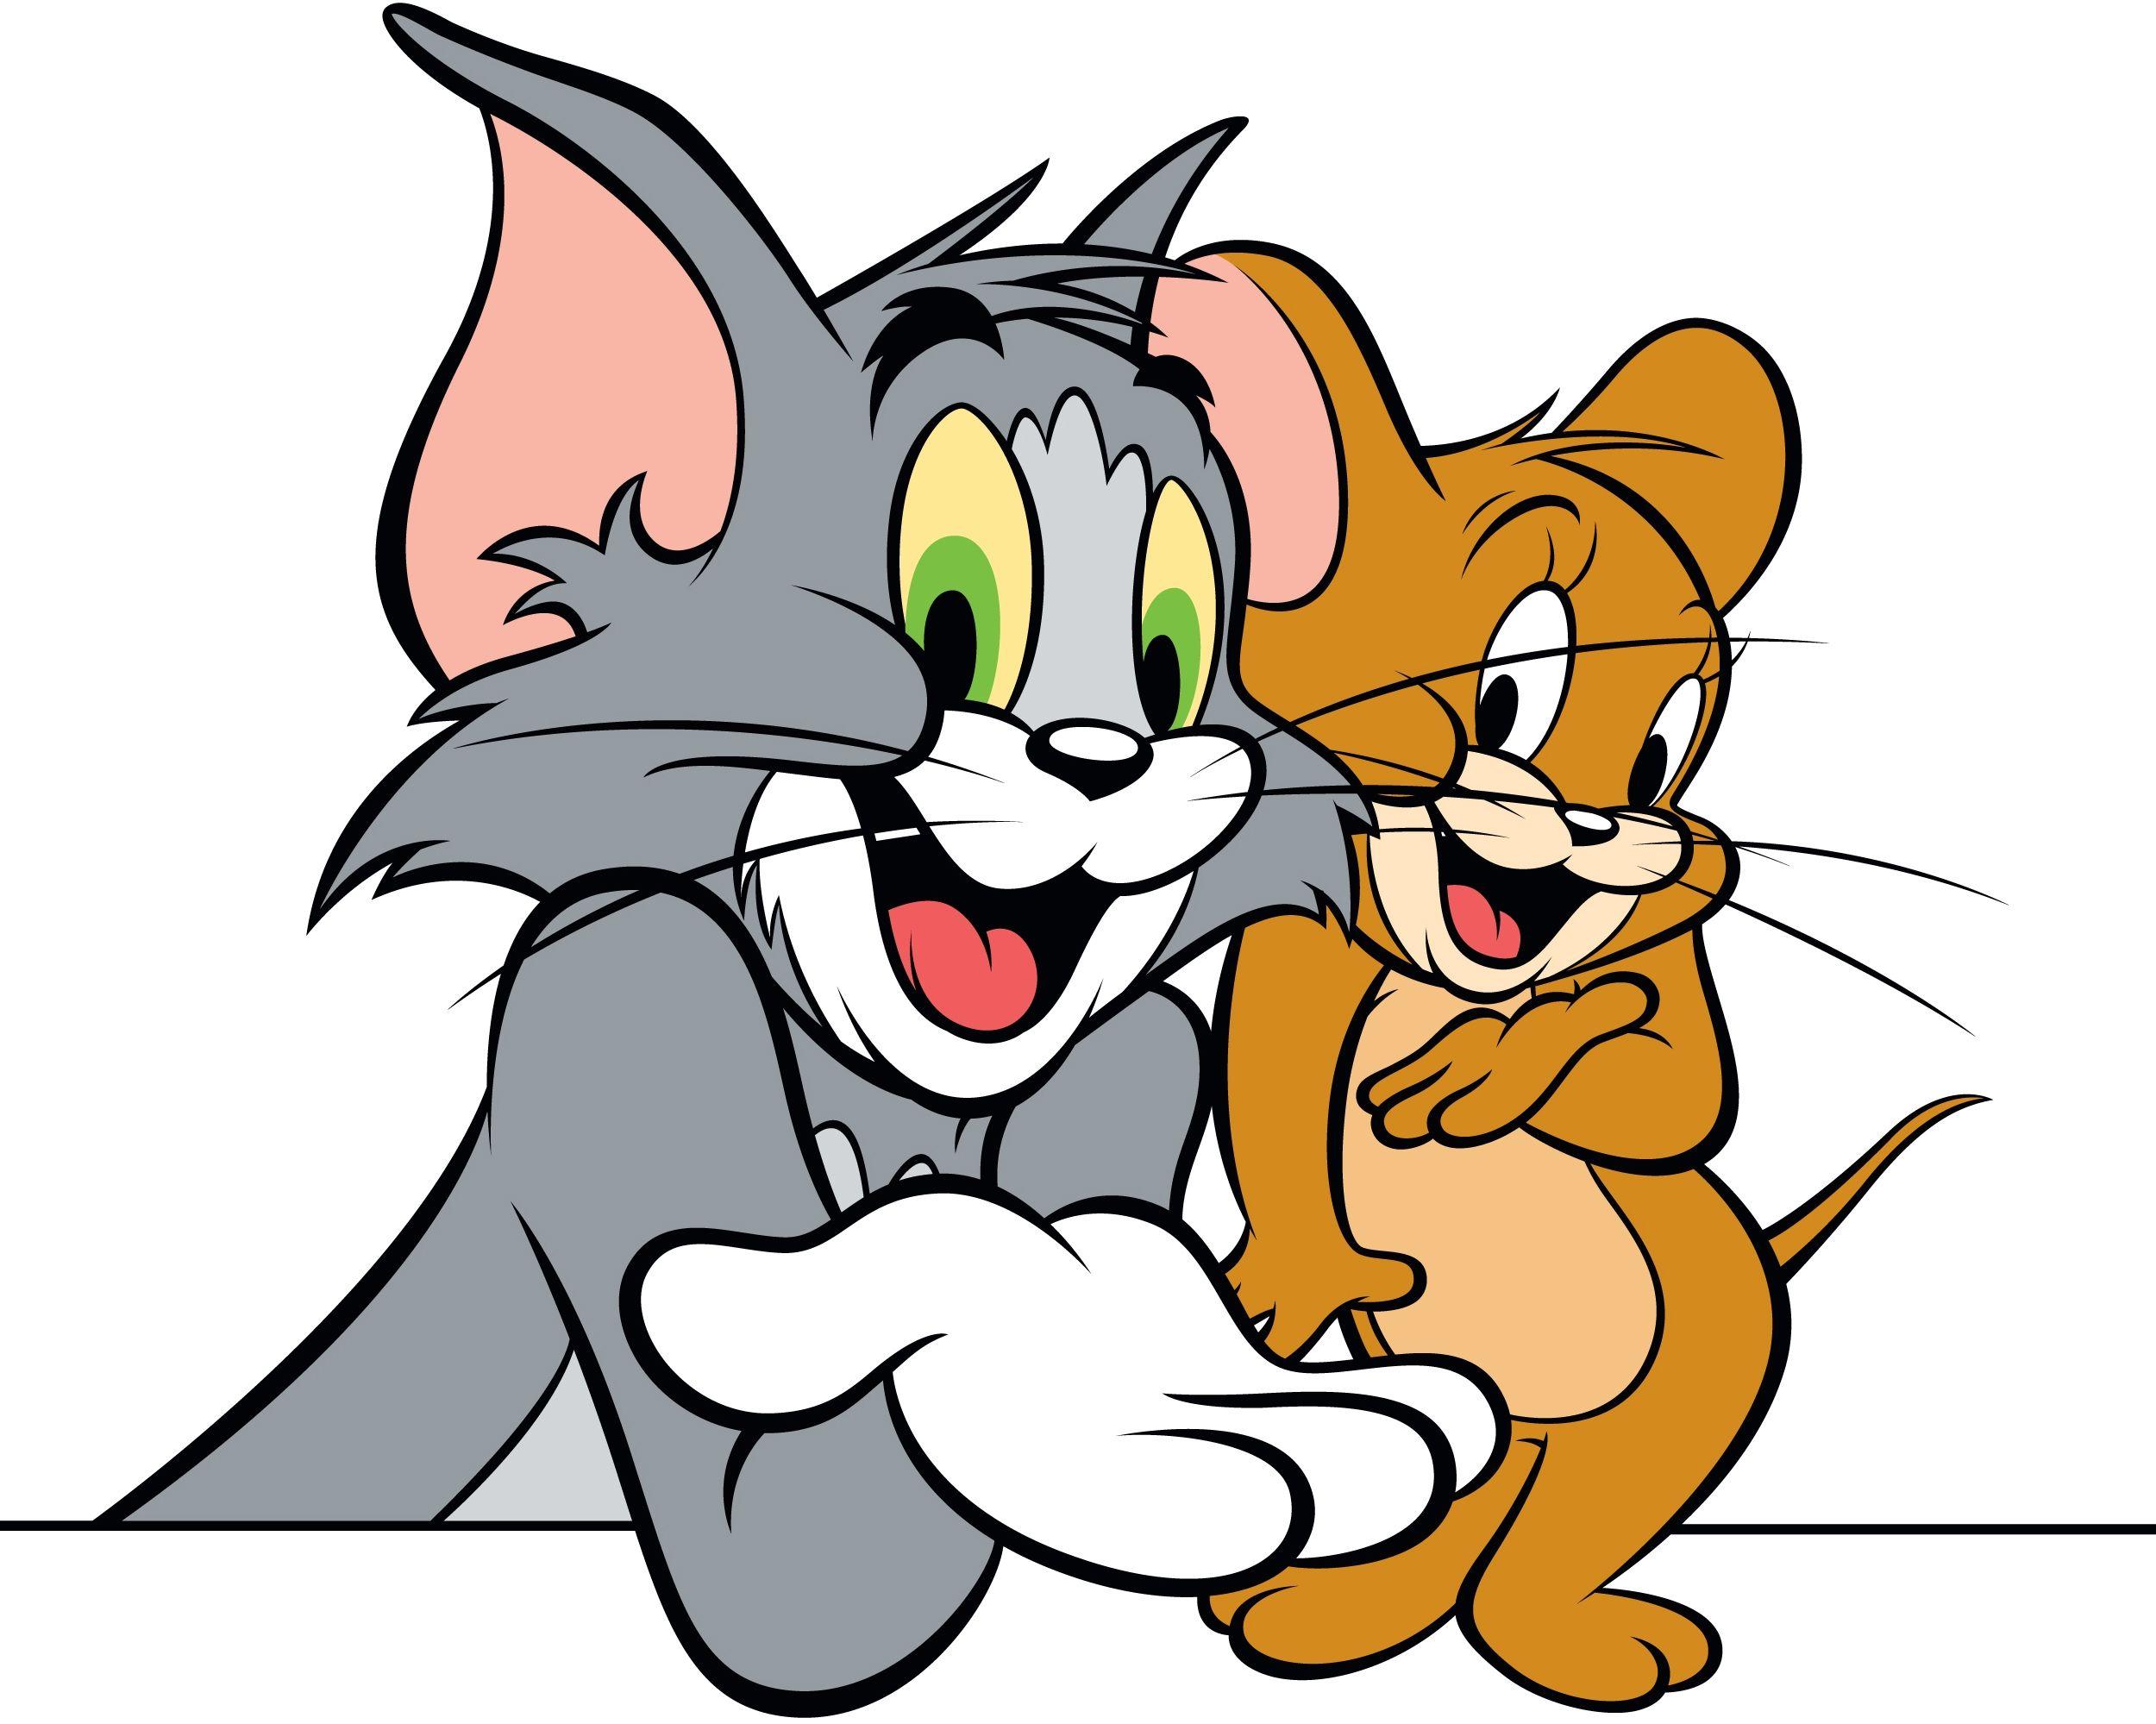 Tom And Jerry Best Friends Free HD Wallpaper. Tom and jerry wallpaper, Tom and jerry cartoon, Tom and jerry hd